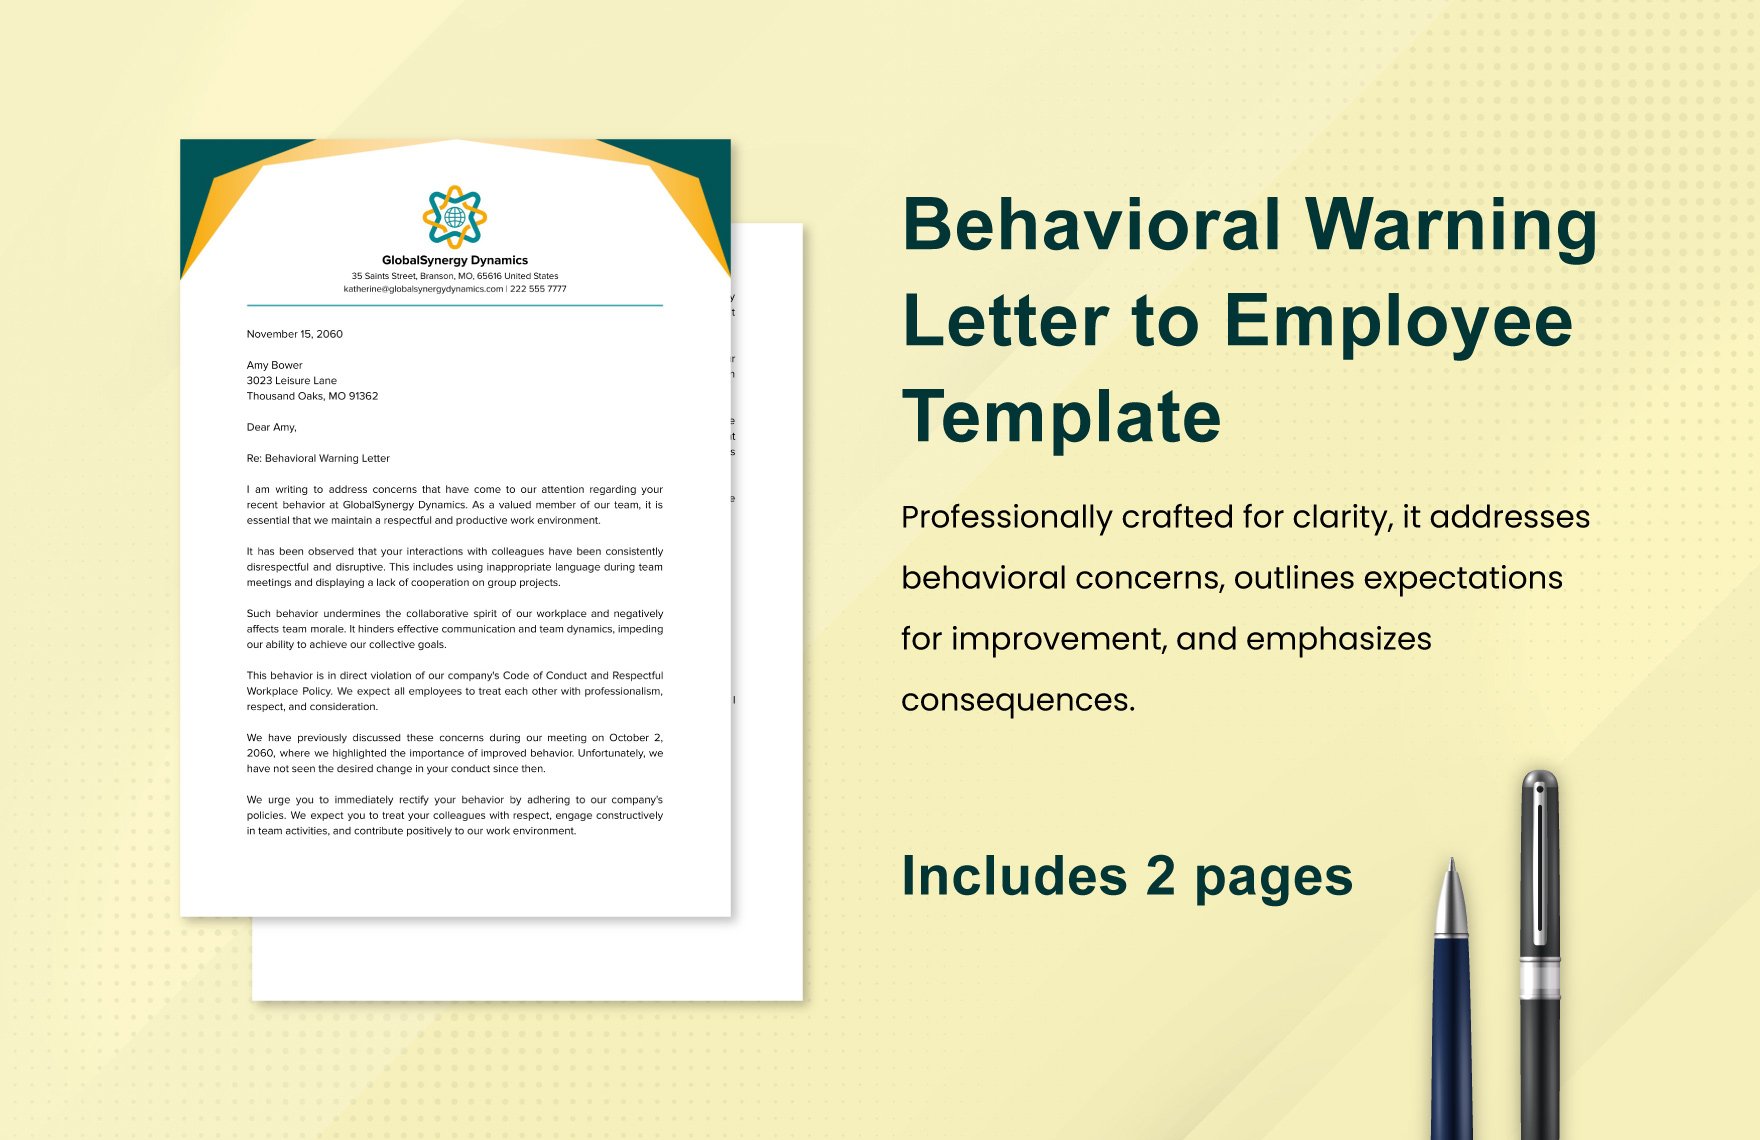 Behavioral Warning Letter to Employee Template